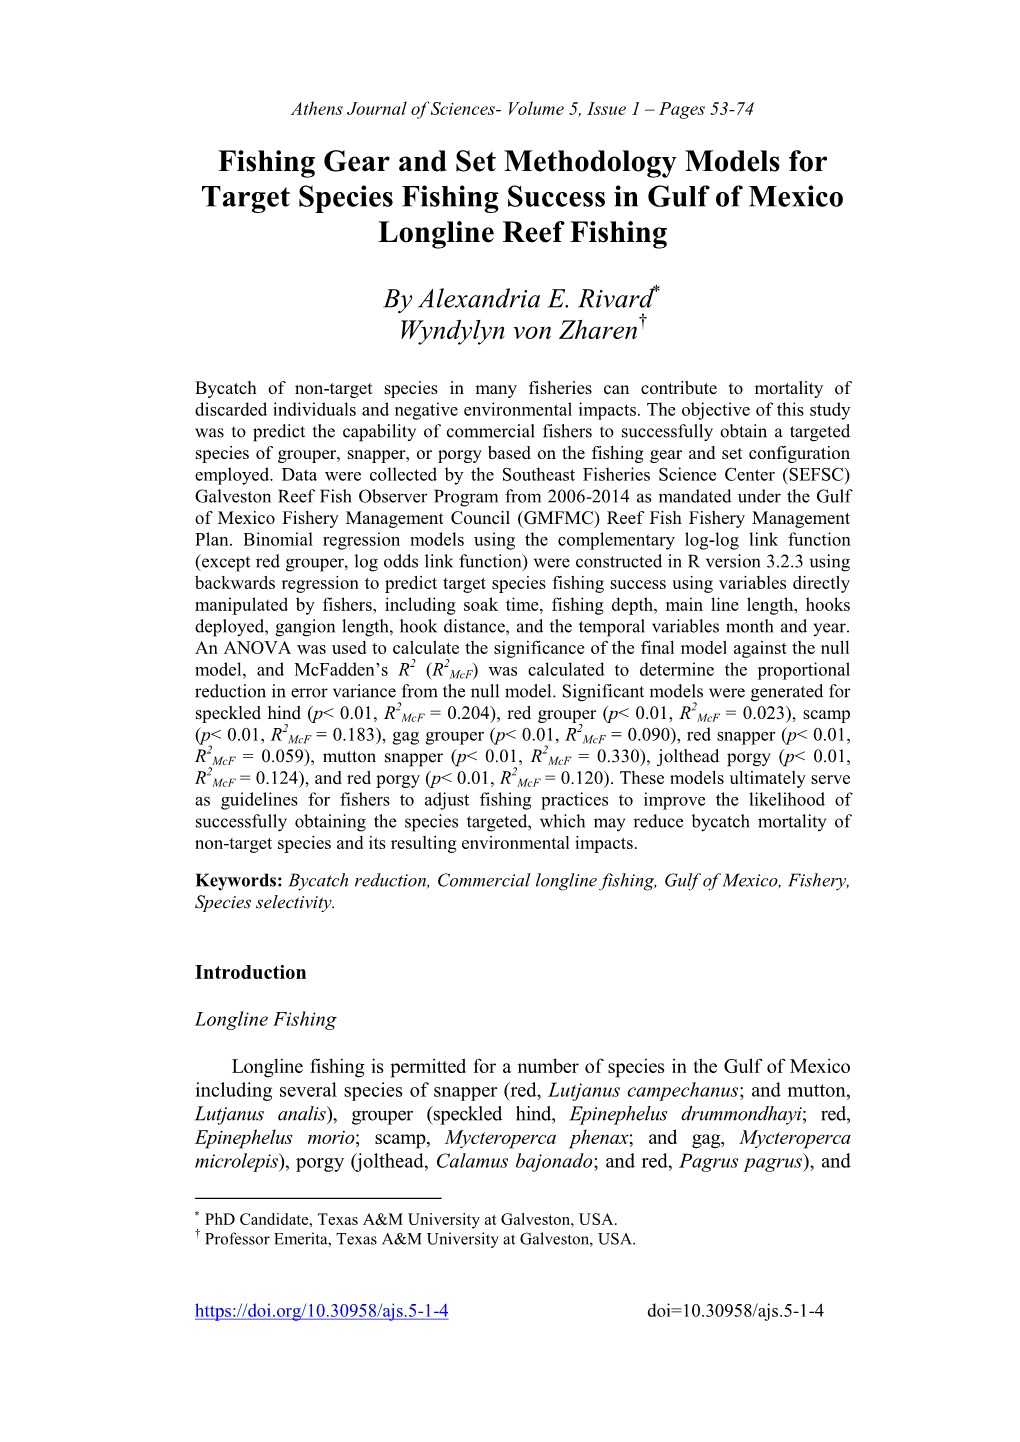 Fishing Gear and Set Methodology Models for Target Species Fishing Success in Gulf of Mexico Longline Reef Fishing